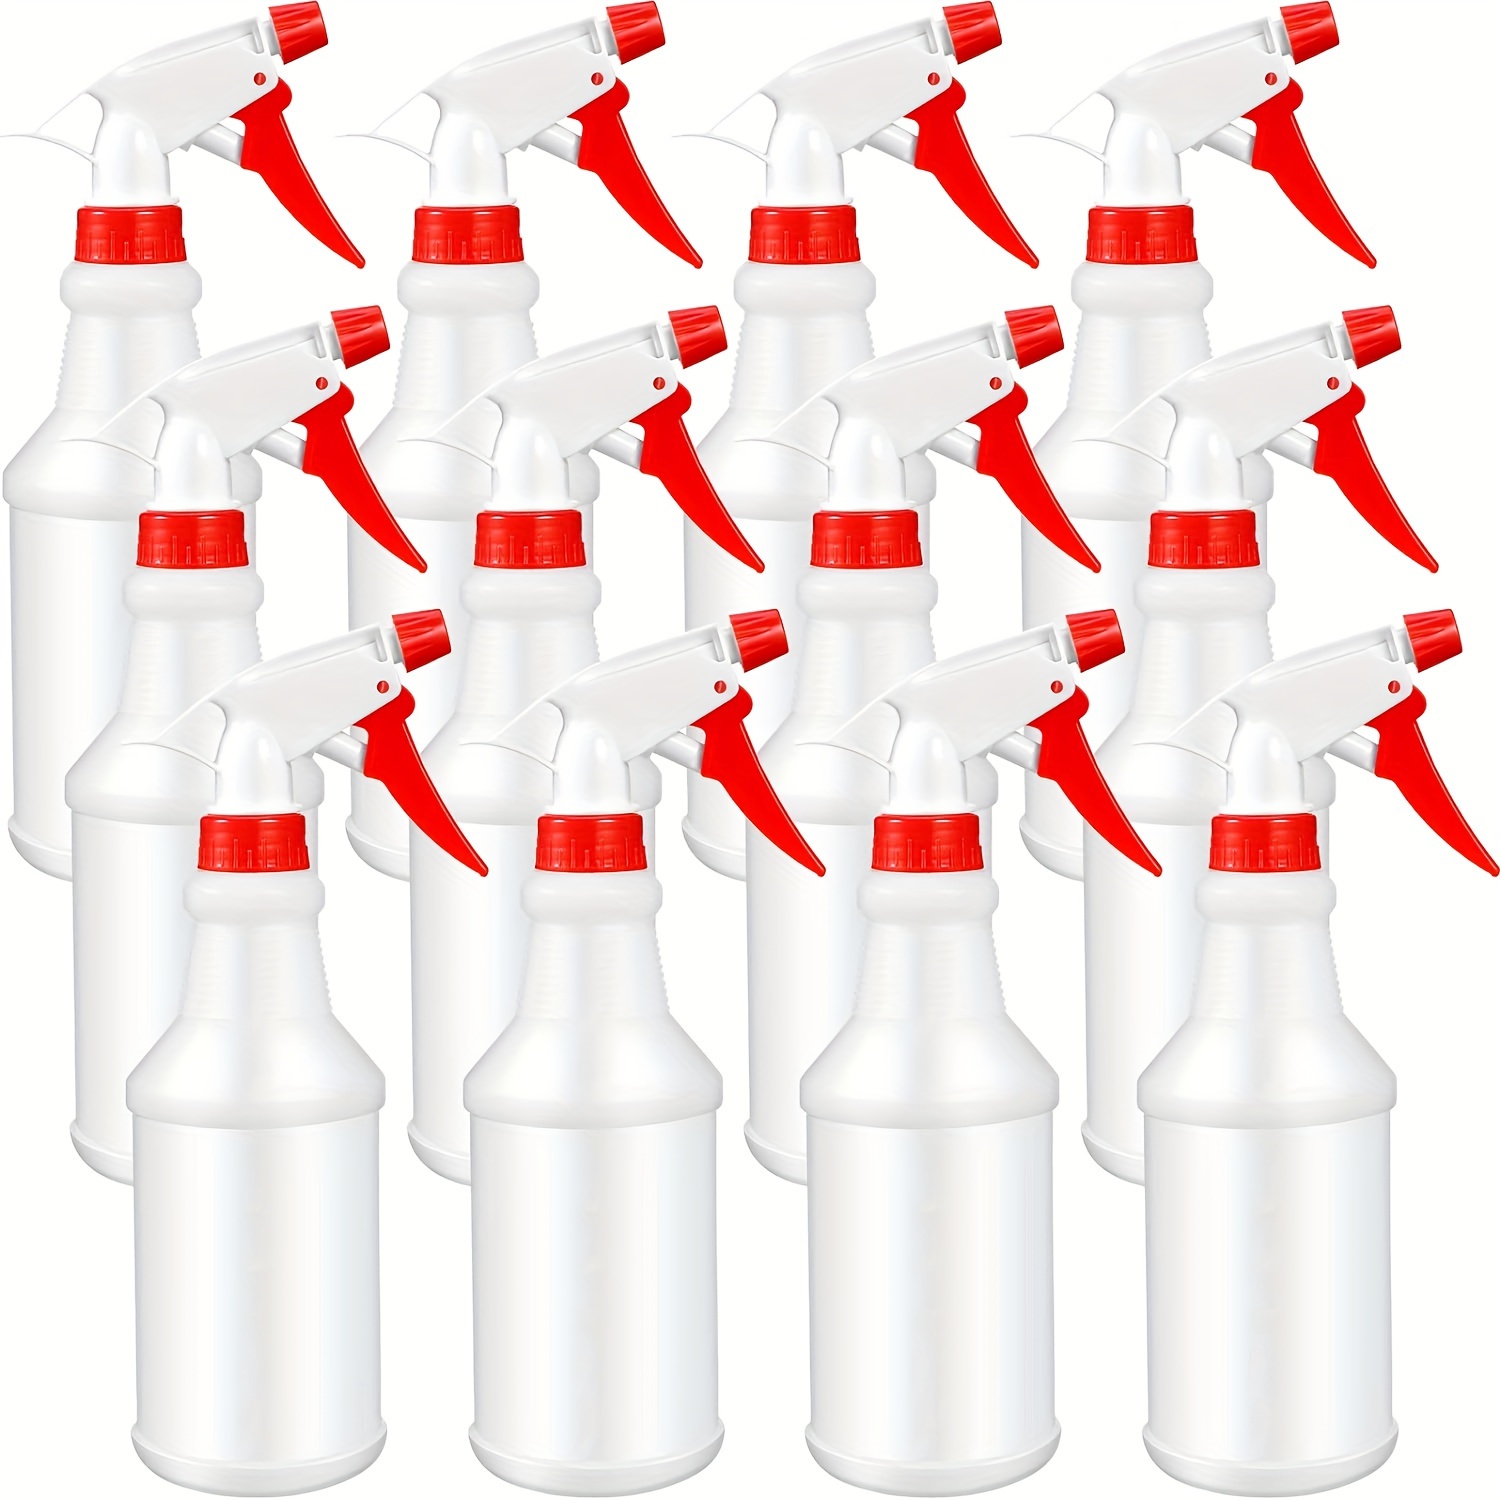 

12pcs 16oz Plastic Spray Bottles, Leak & Clog-free With Ergonomic Trigger, Reusable For Cleaning Solutions, Watering, Auto Detailing, Bathroom & Kitchen, Home & Commercial Use - Red & White